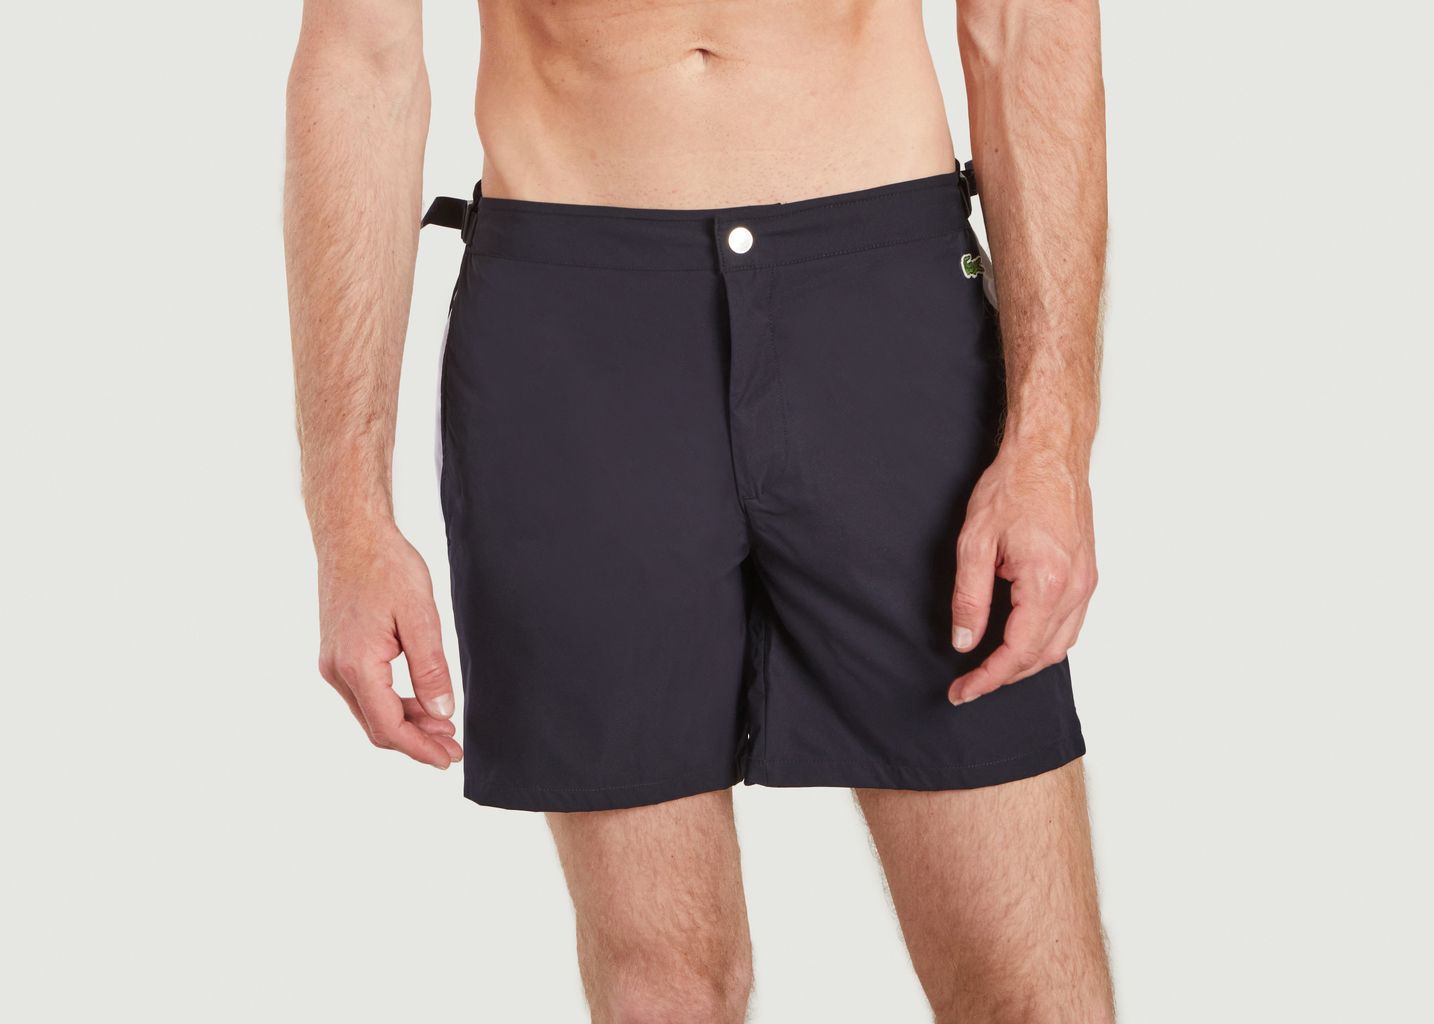 Lightweight swim shorts with contrasting stripes - Lacoste